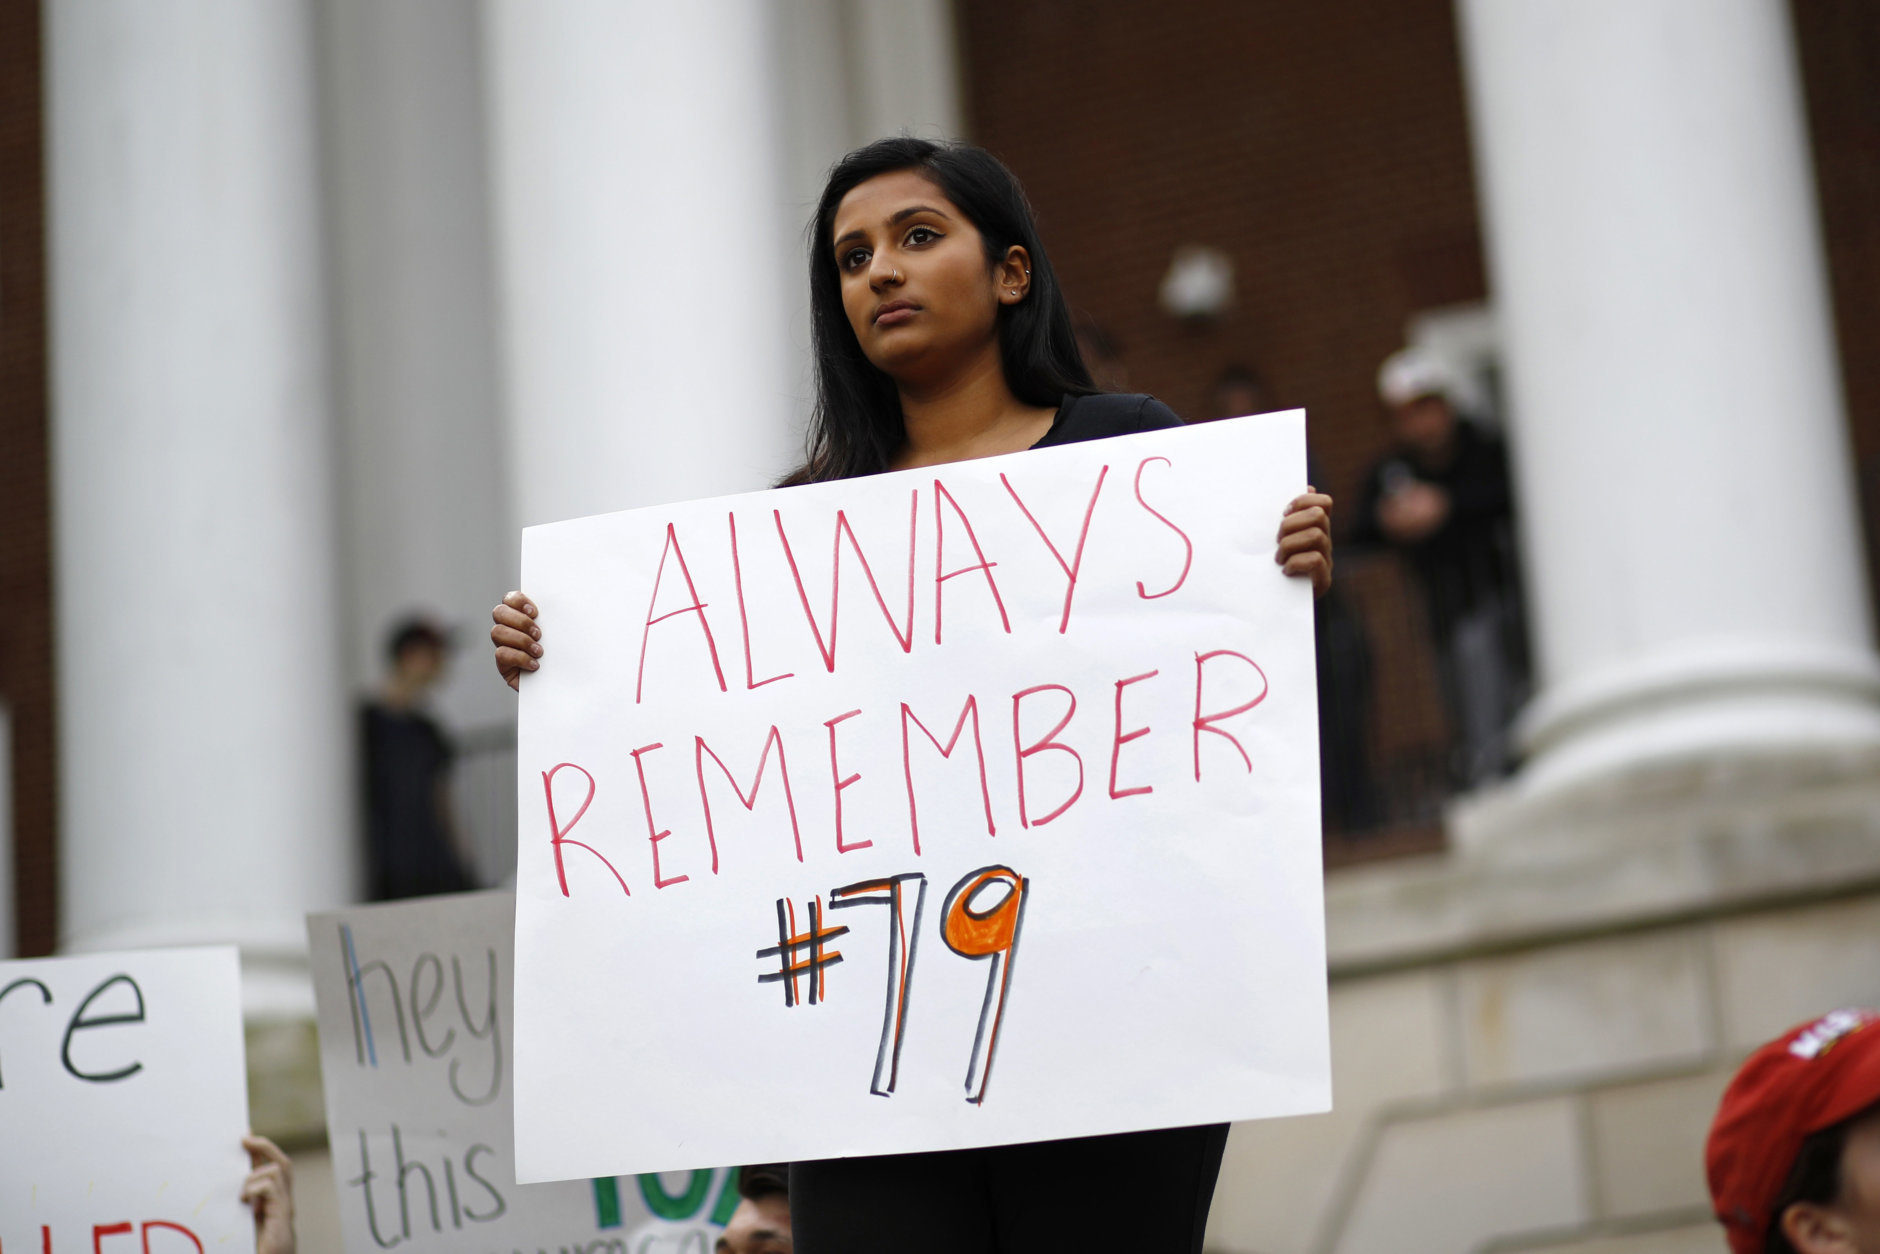 University of Maryland student Ro Nambiar holds a sign as people gather at a "Justice for Jordan" rally in remembrance of offensive lineman Jordan McNair, Thursday, Nov. 1, 2018, on the university's campus in College Park, Md. Maryland President Wallace Loh fired football head coach DJ Durkin Wednesday, about five months after McNair collapsed on a practice field and later died of heatstroke. (AP Photo/Patrick Semansky)